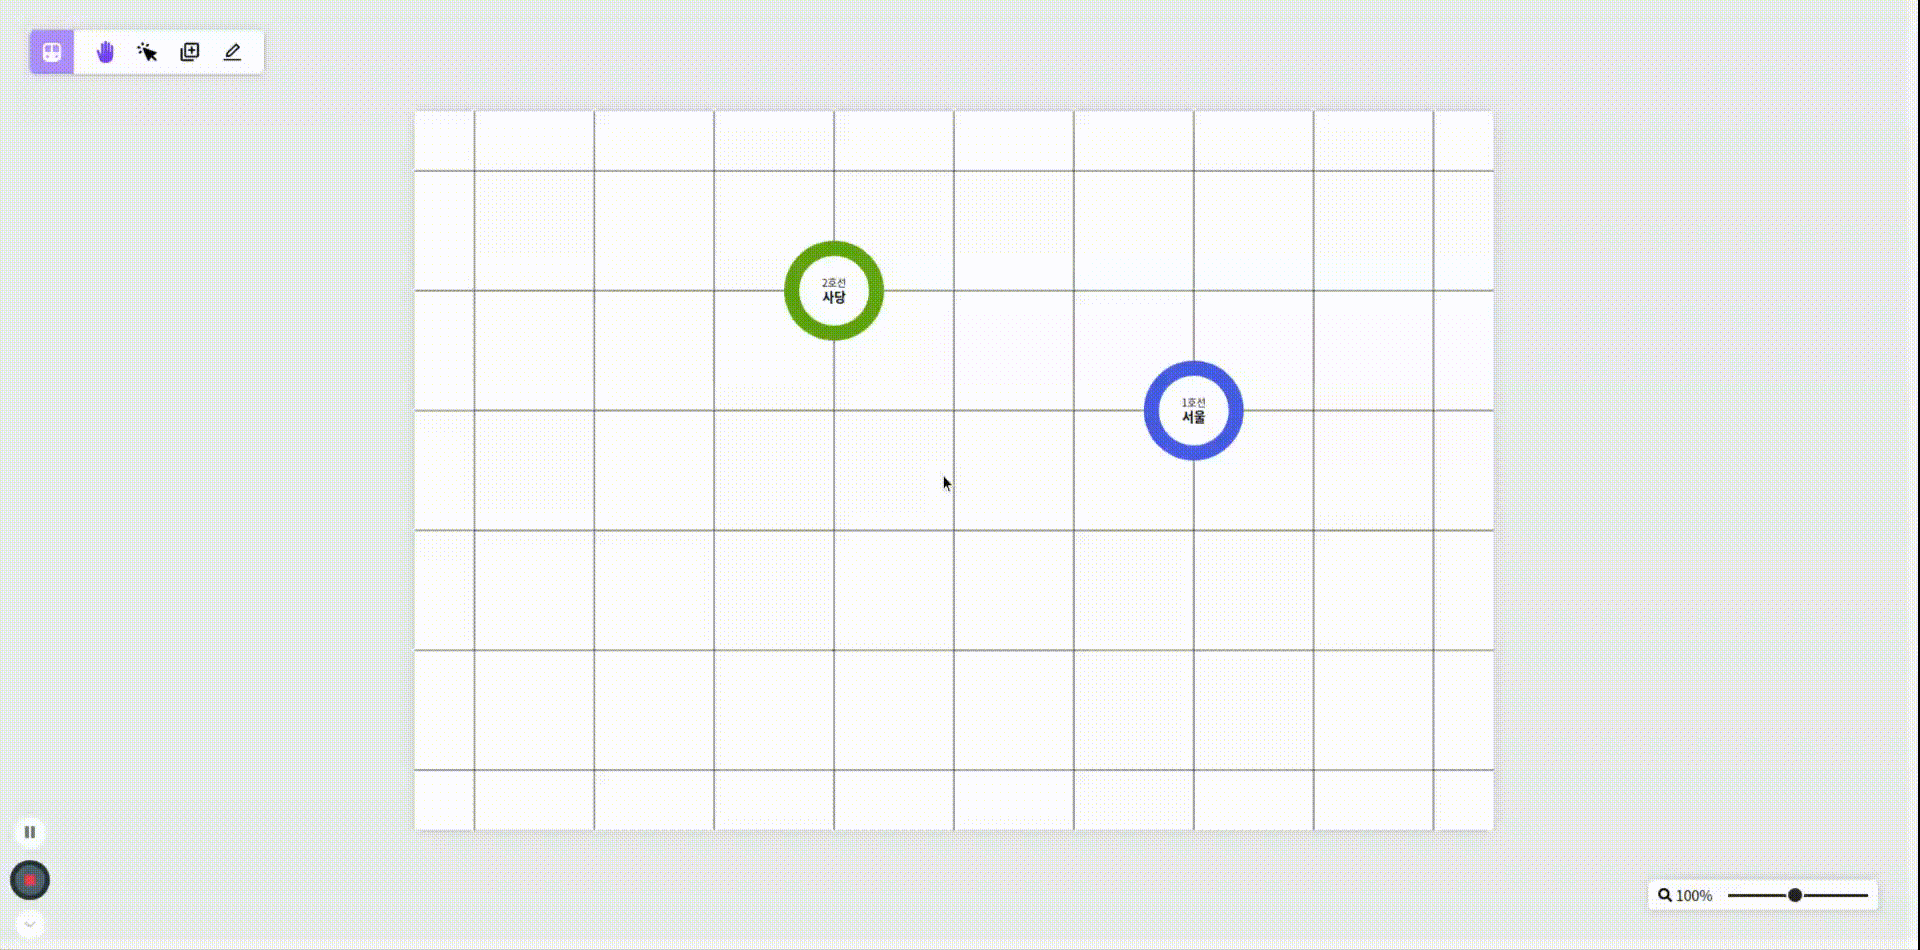 train-map-visualizer-side-project-midterm-review-5.gif